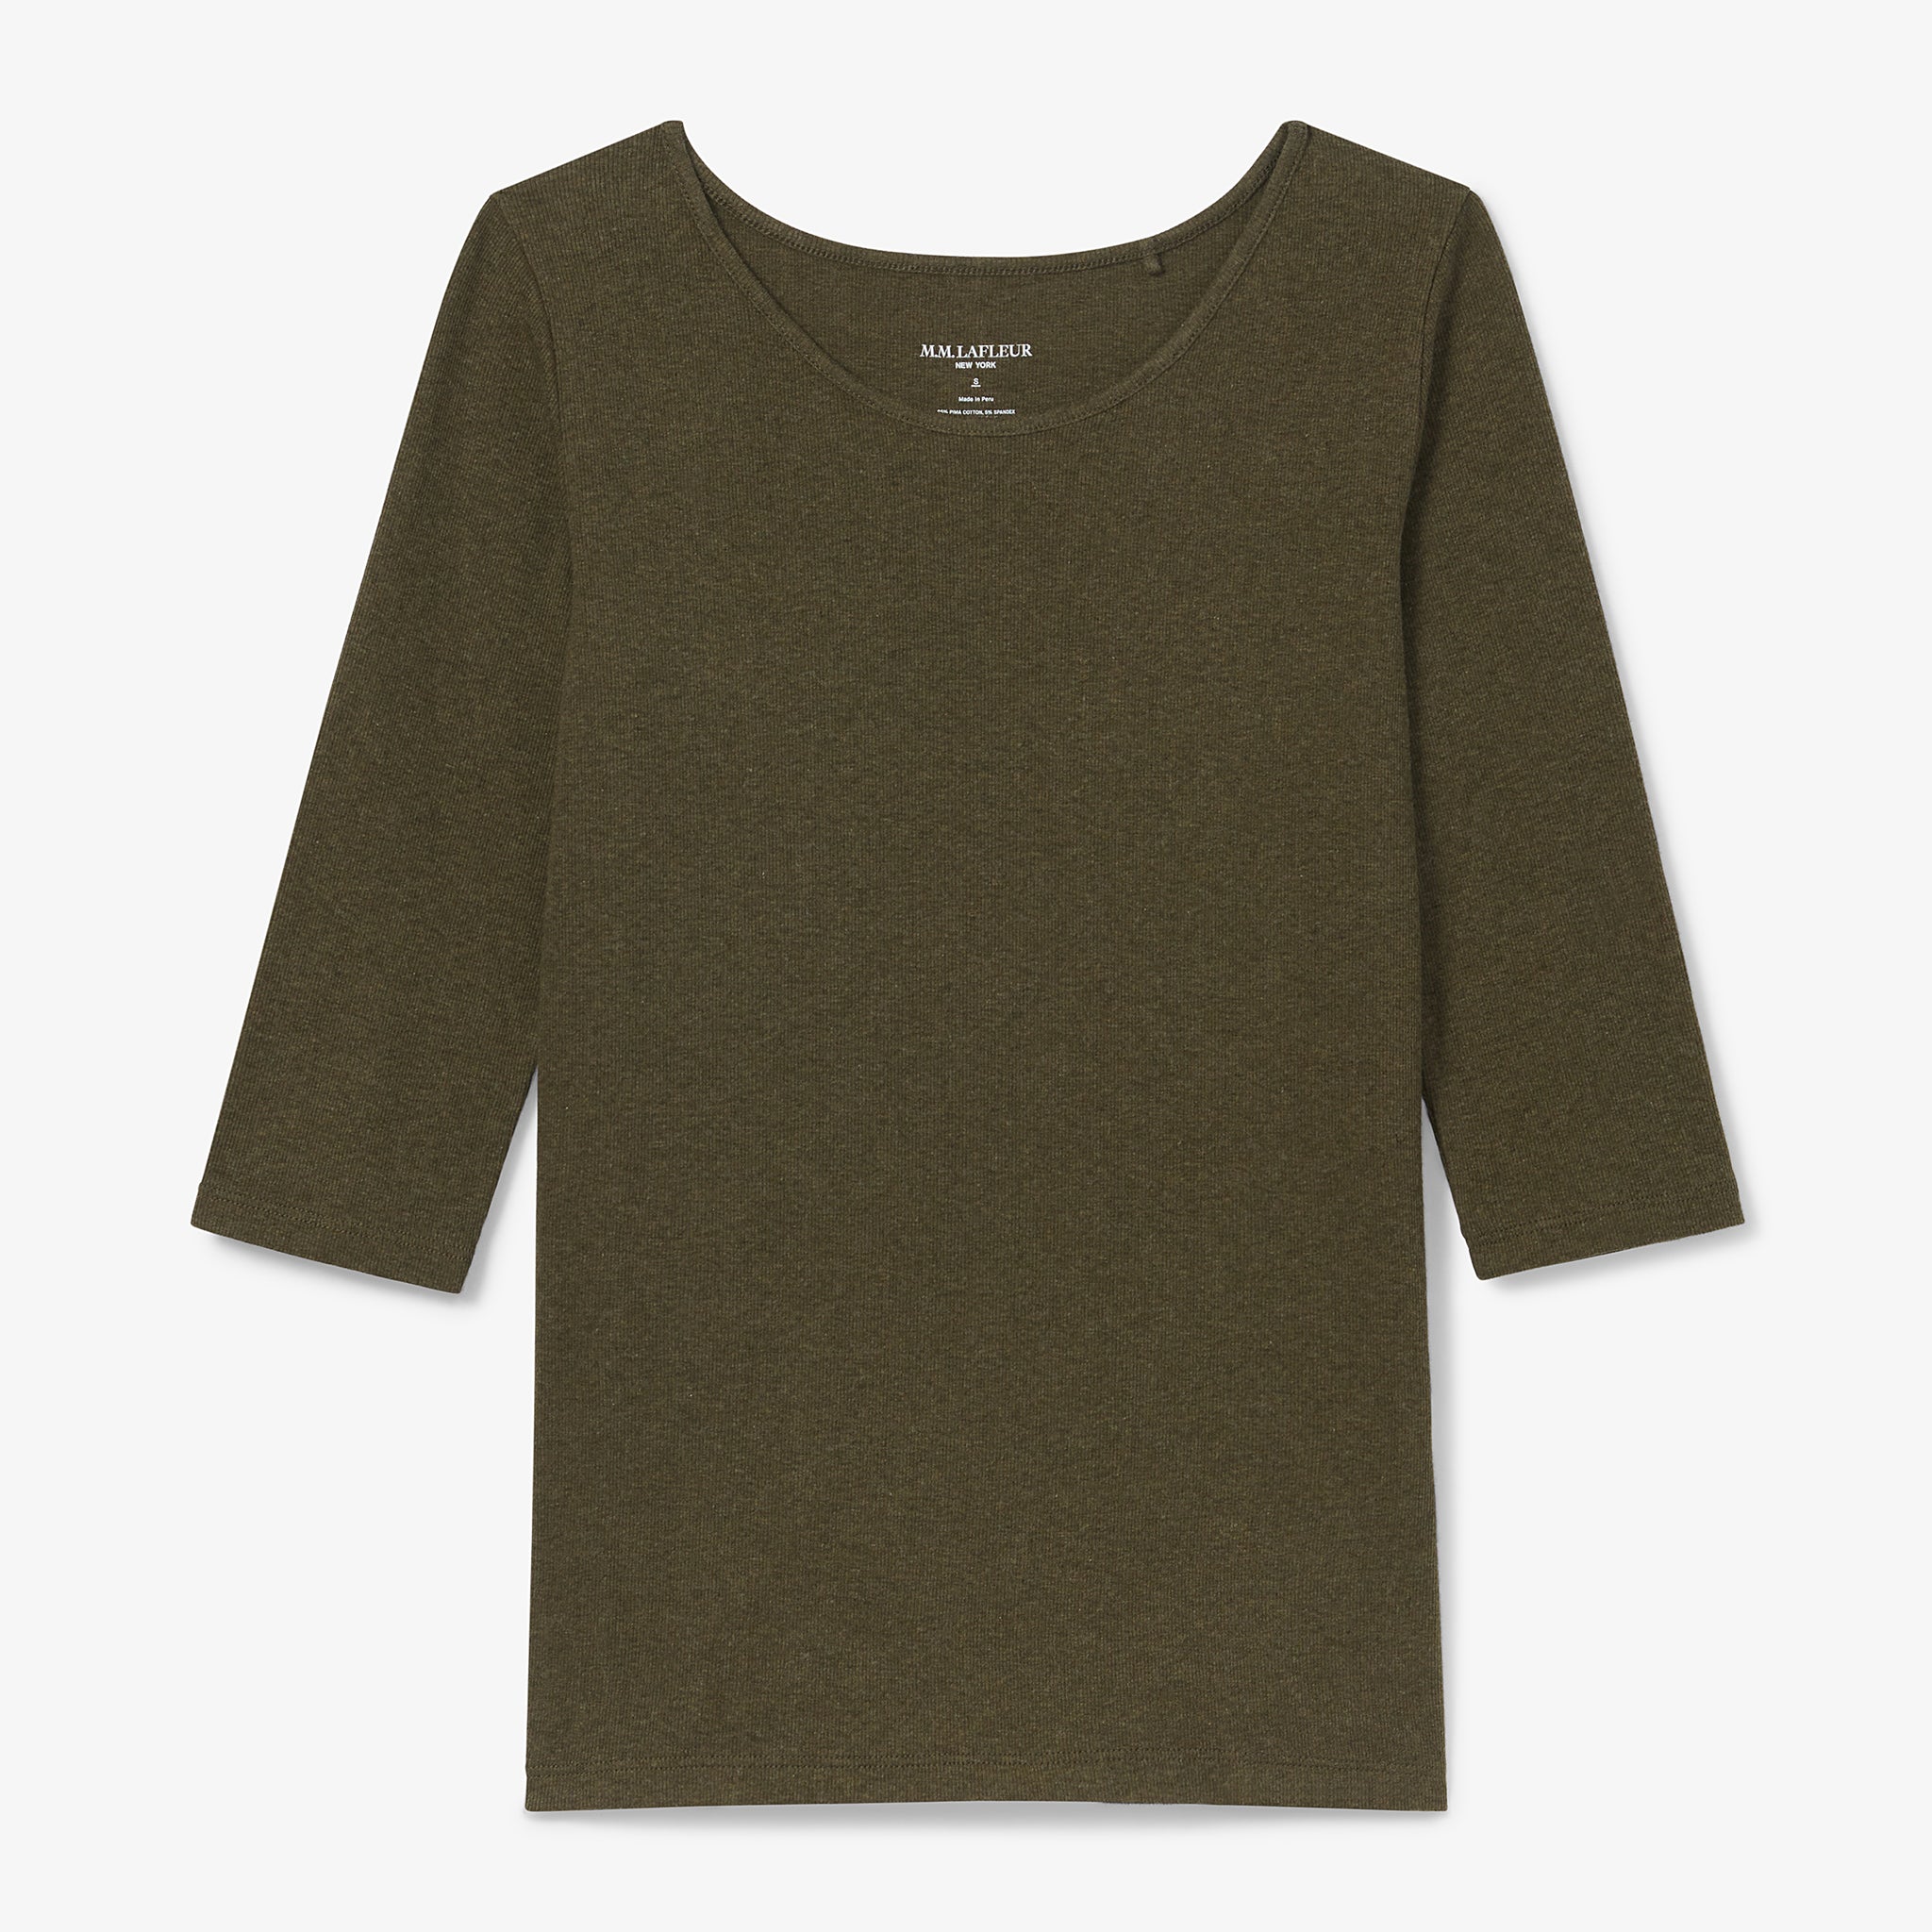 still image of the soyoung tshirt in army melange